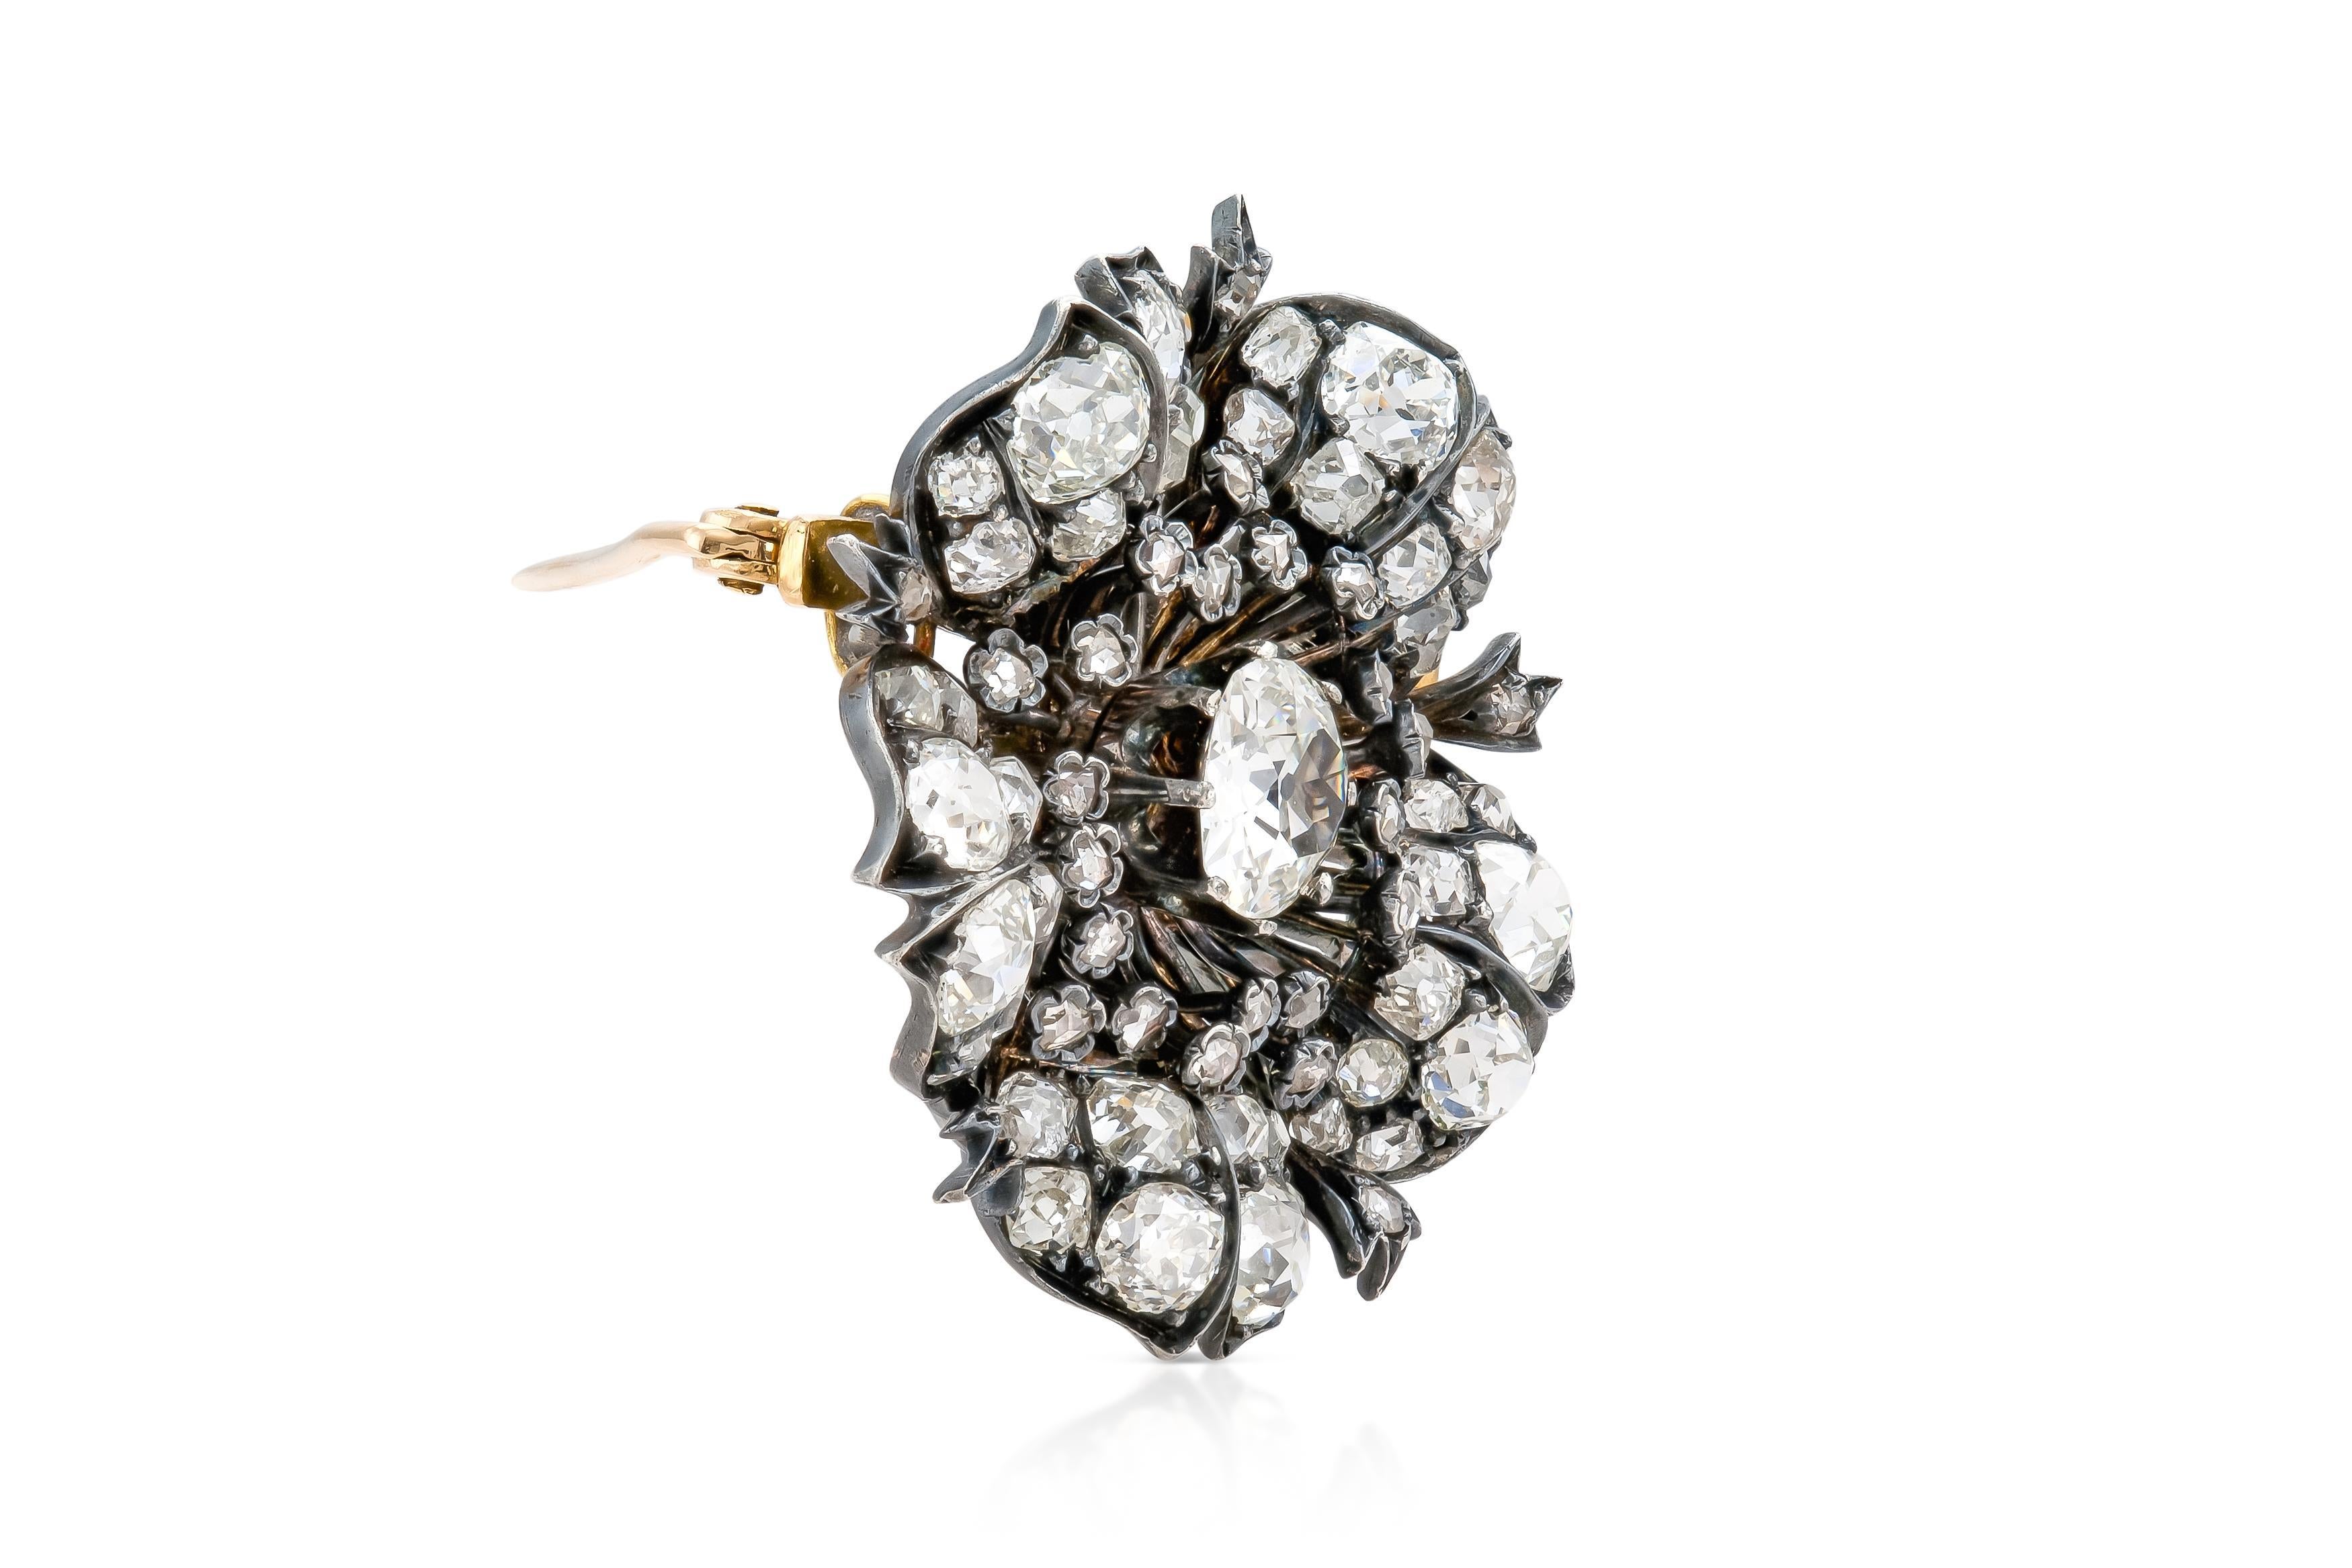 Finely crafted in silver on top of yellow gold with an Old Mine cut center Diamond weighing approximately 1.60 carats.
The brooch features smaller Old Mine cut Diamonds weighing approximately a total of 6.00 carats.
All diamonds are of H-I color,